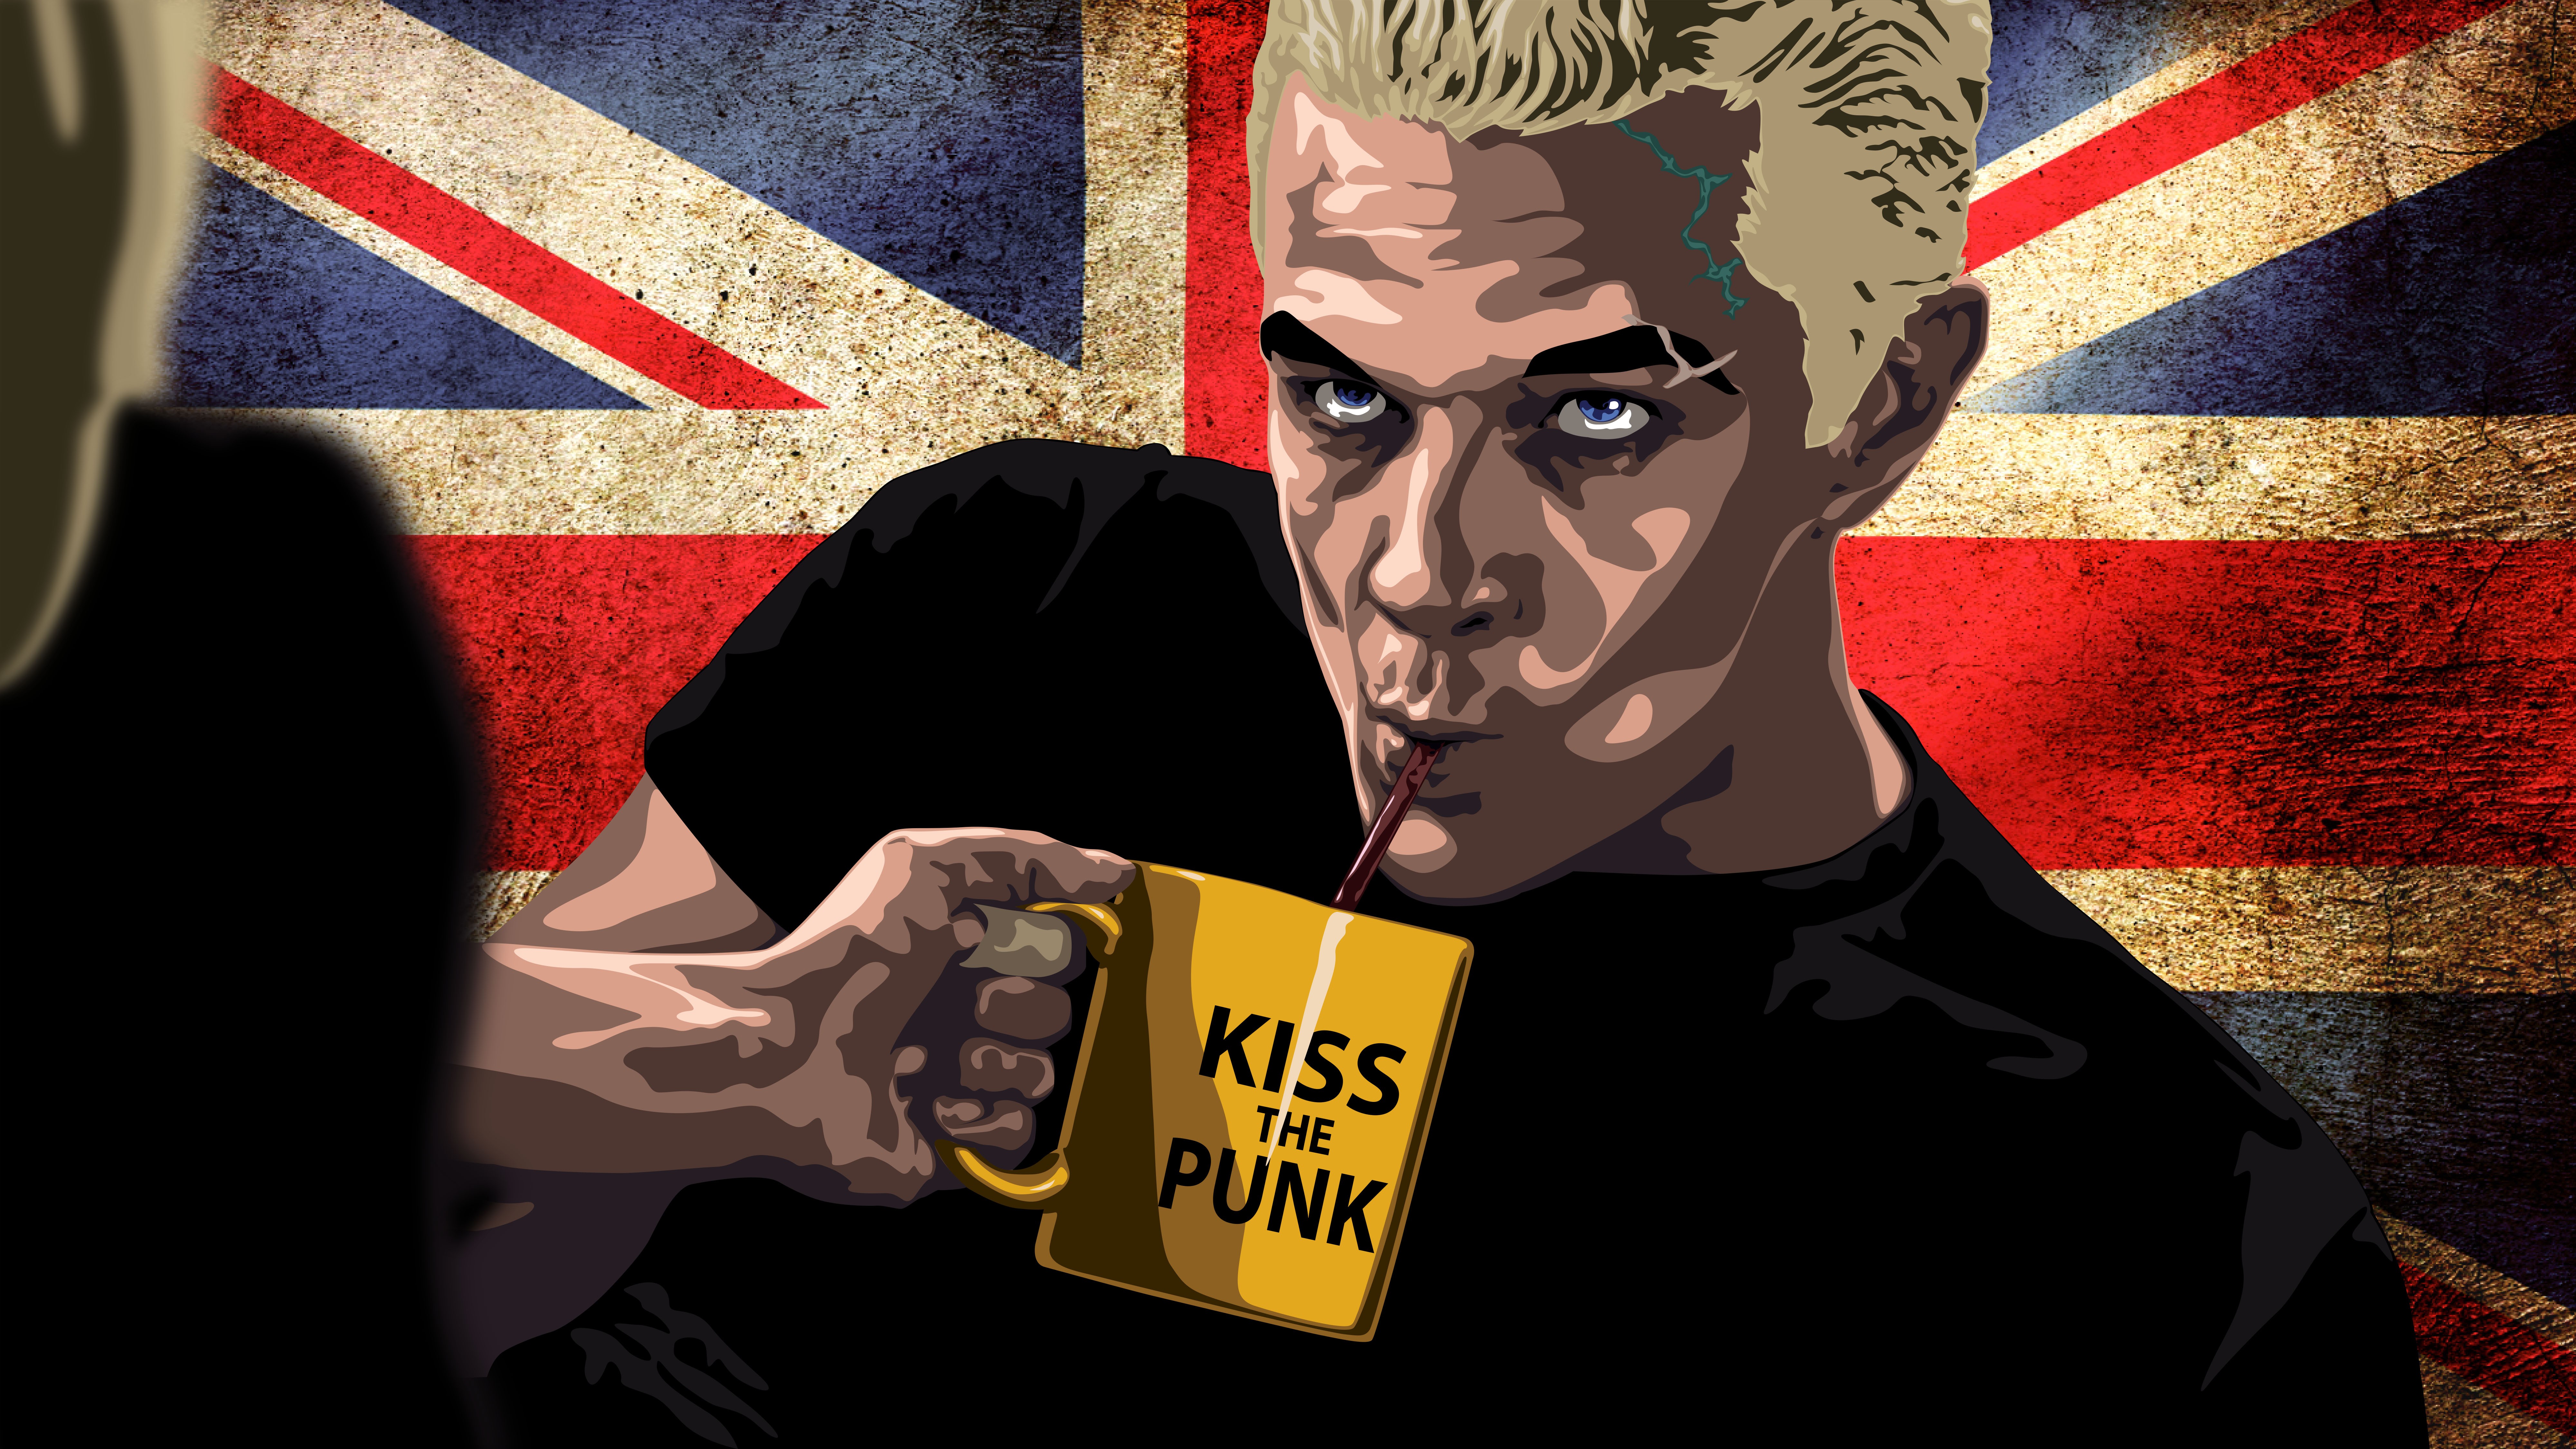 Buffy The Vampire Slayer, Quote, Spike (character), Mugs, Flag Wallpaper